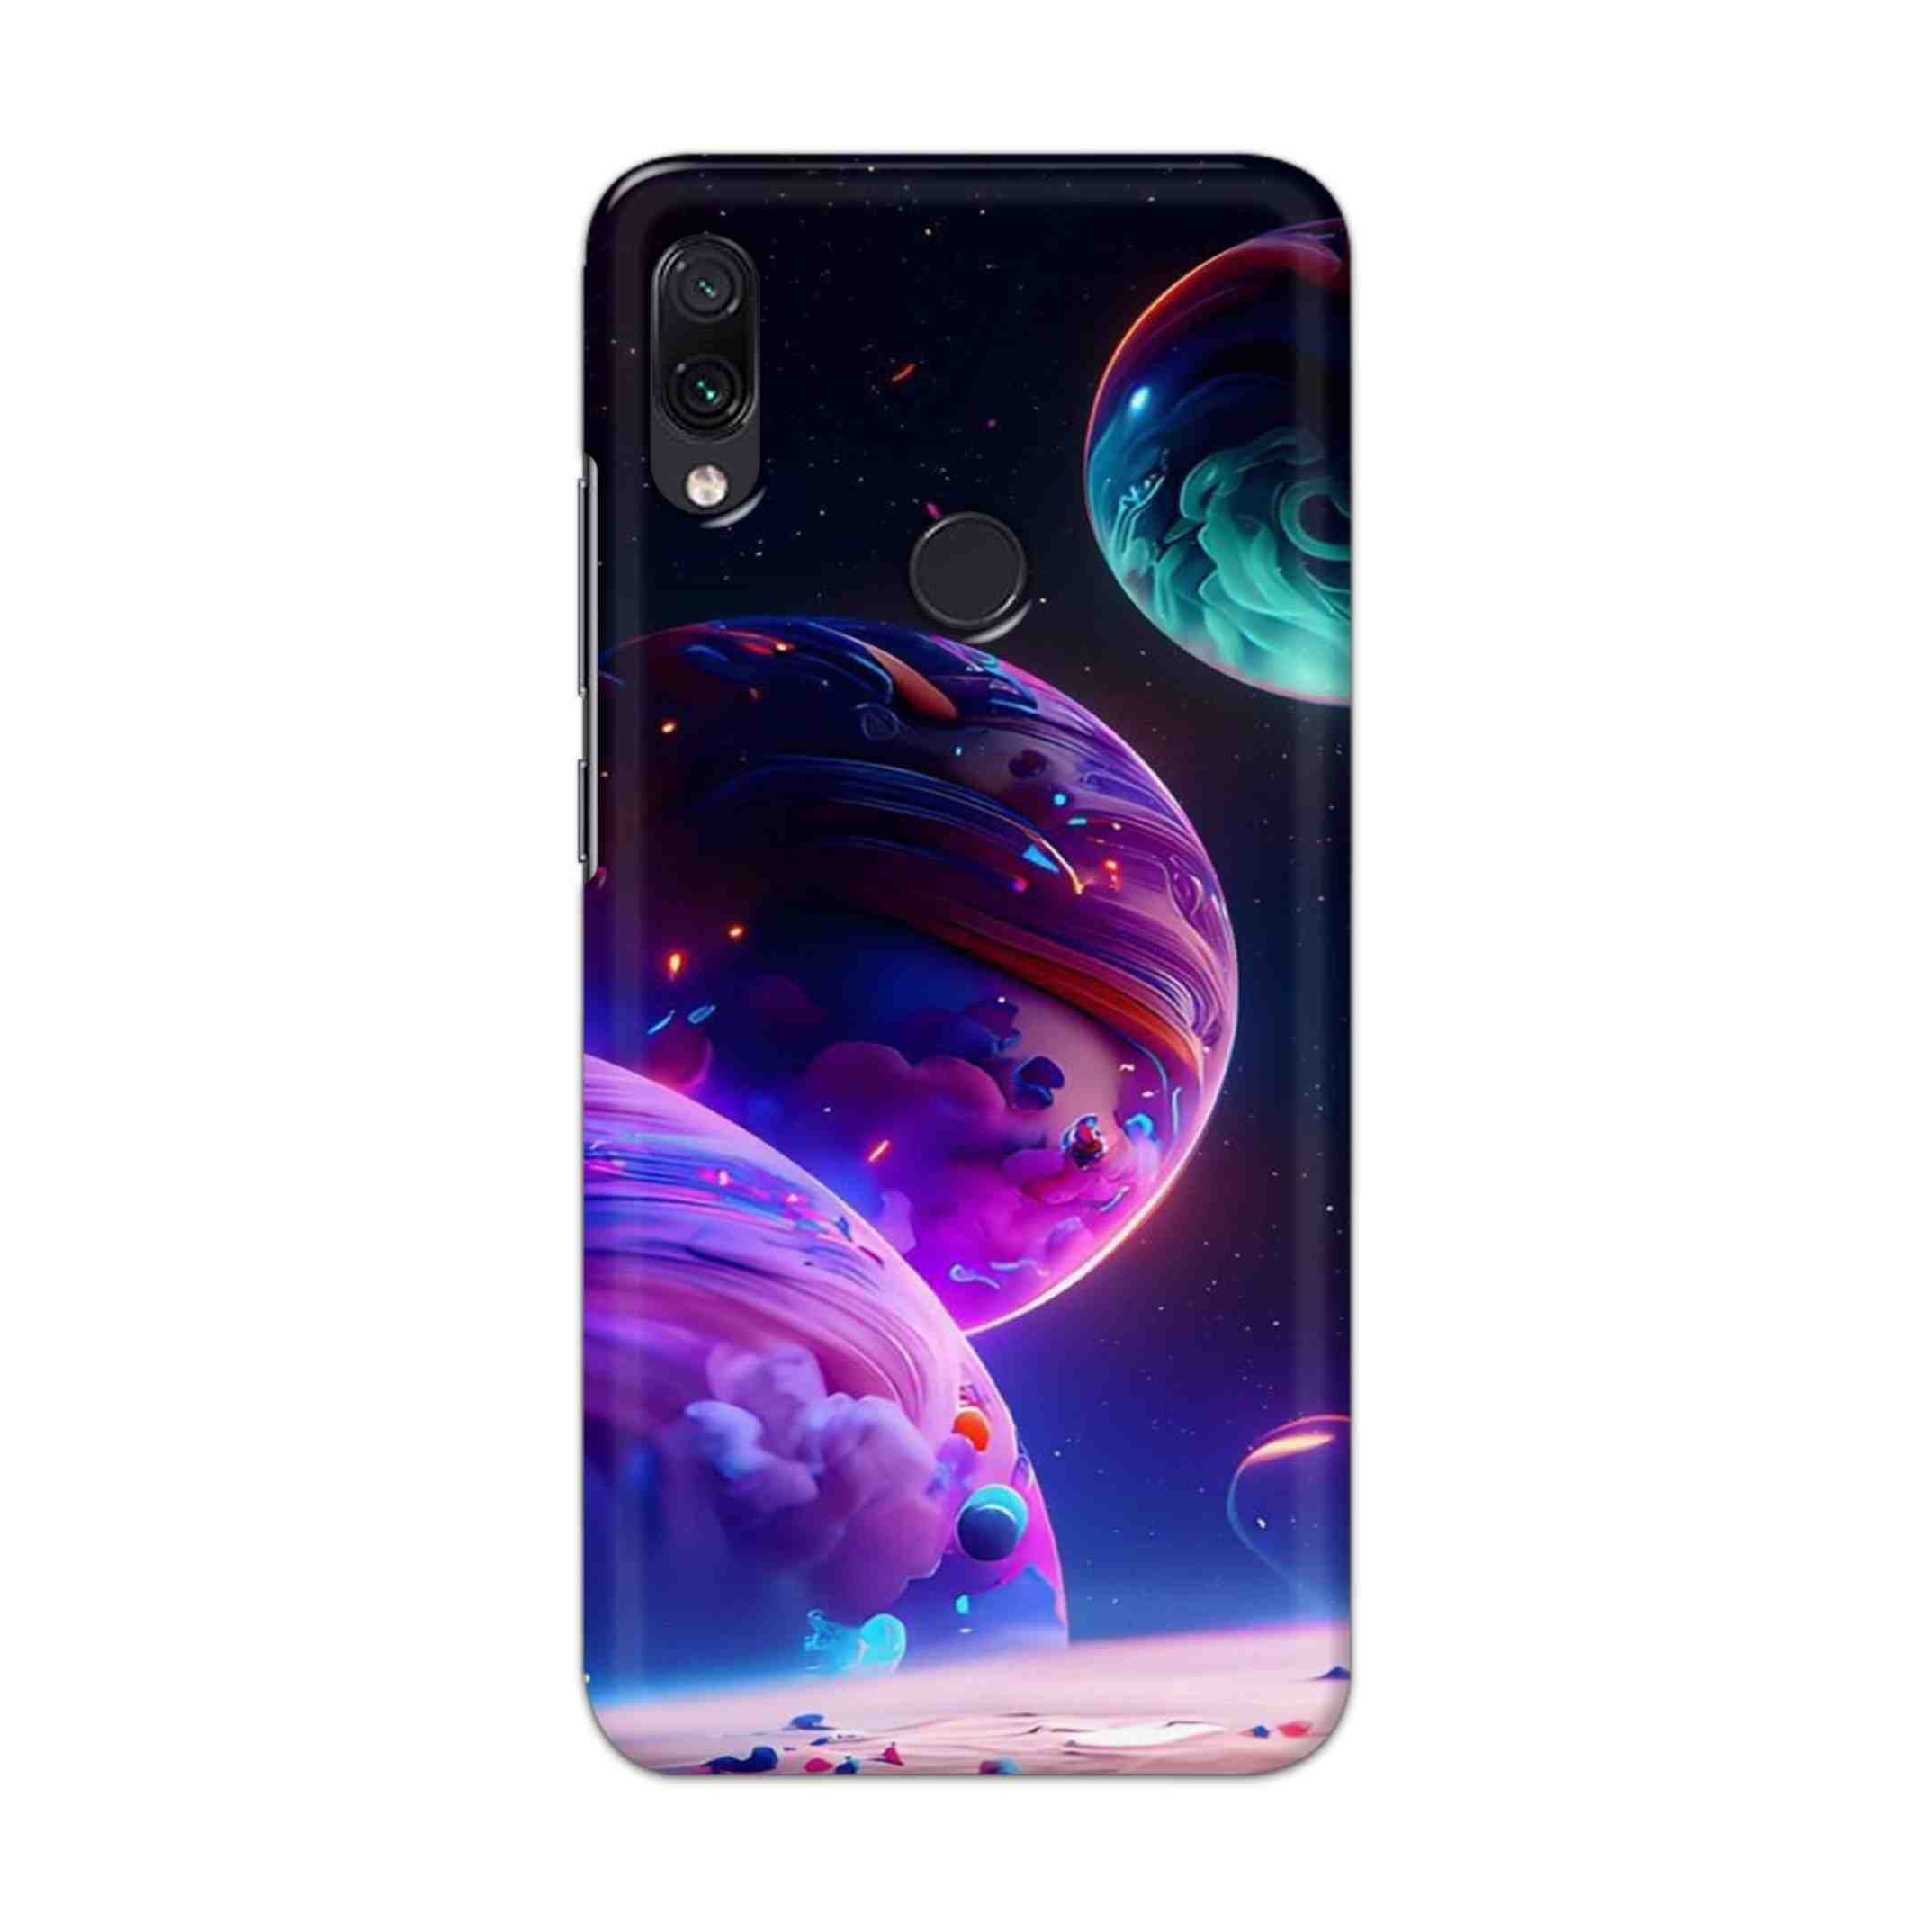 Buy 3 Earth Hard Back Mobile Phone Case Cover For Redmi Note 7 / Note 7 Pro Online